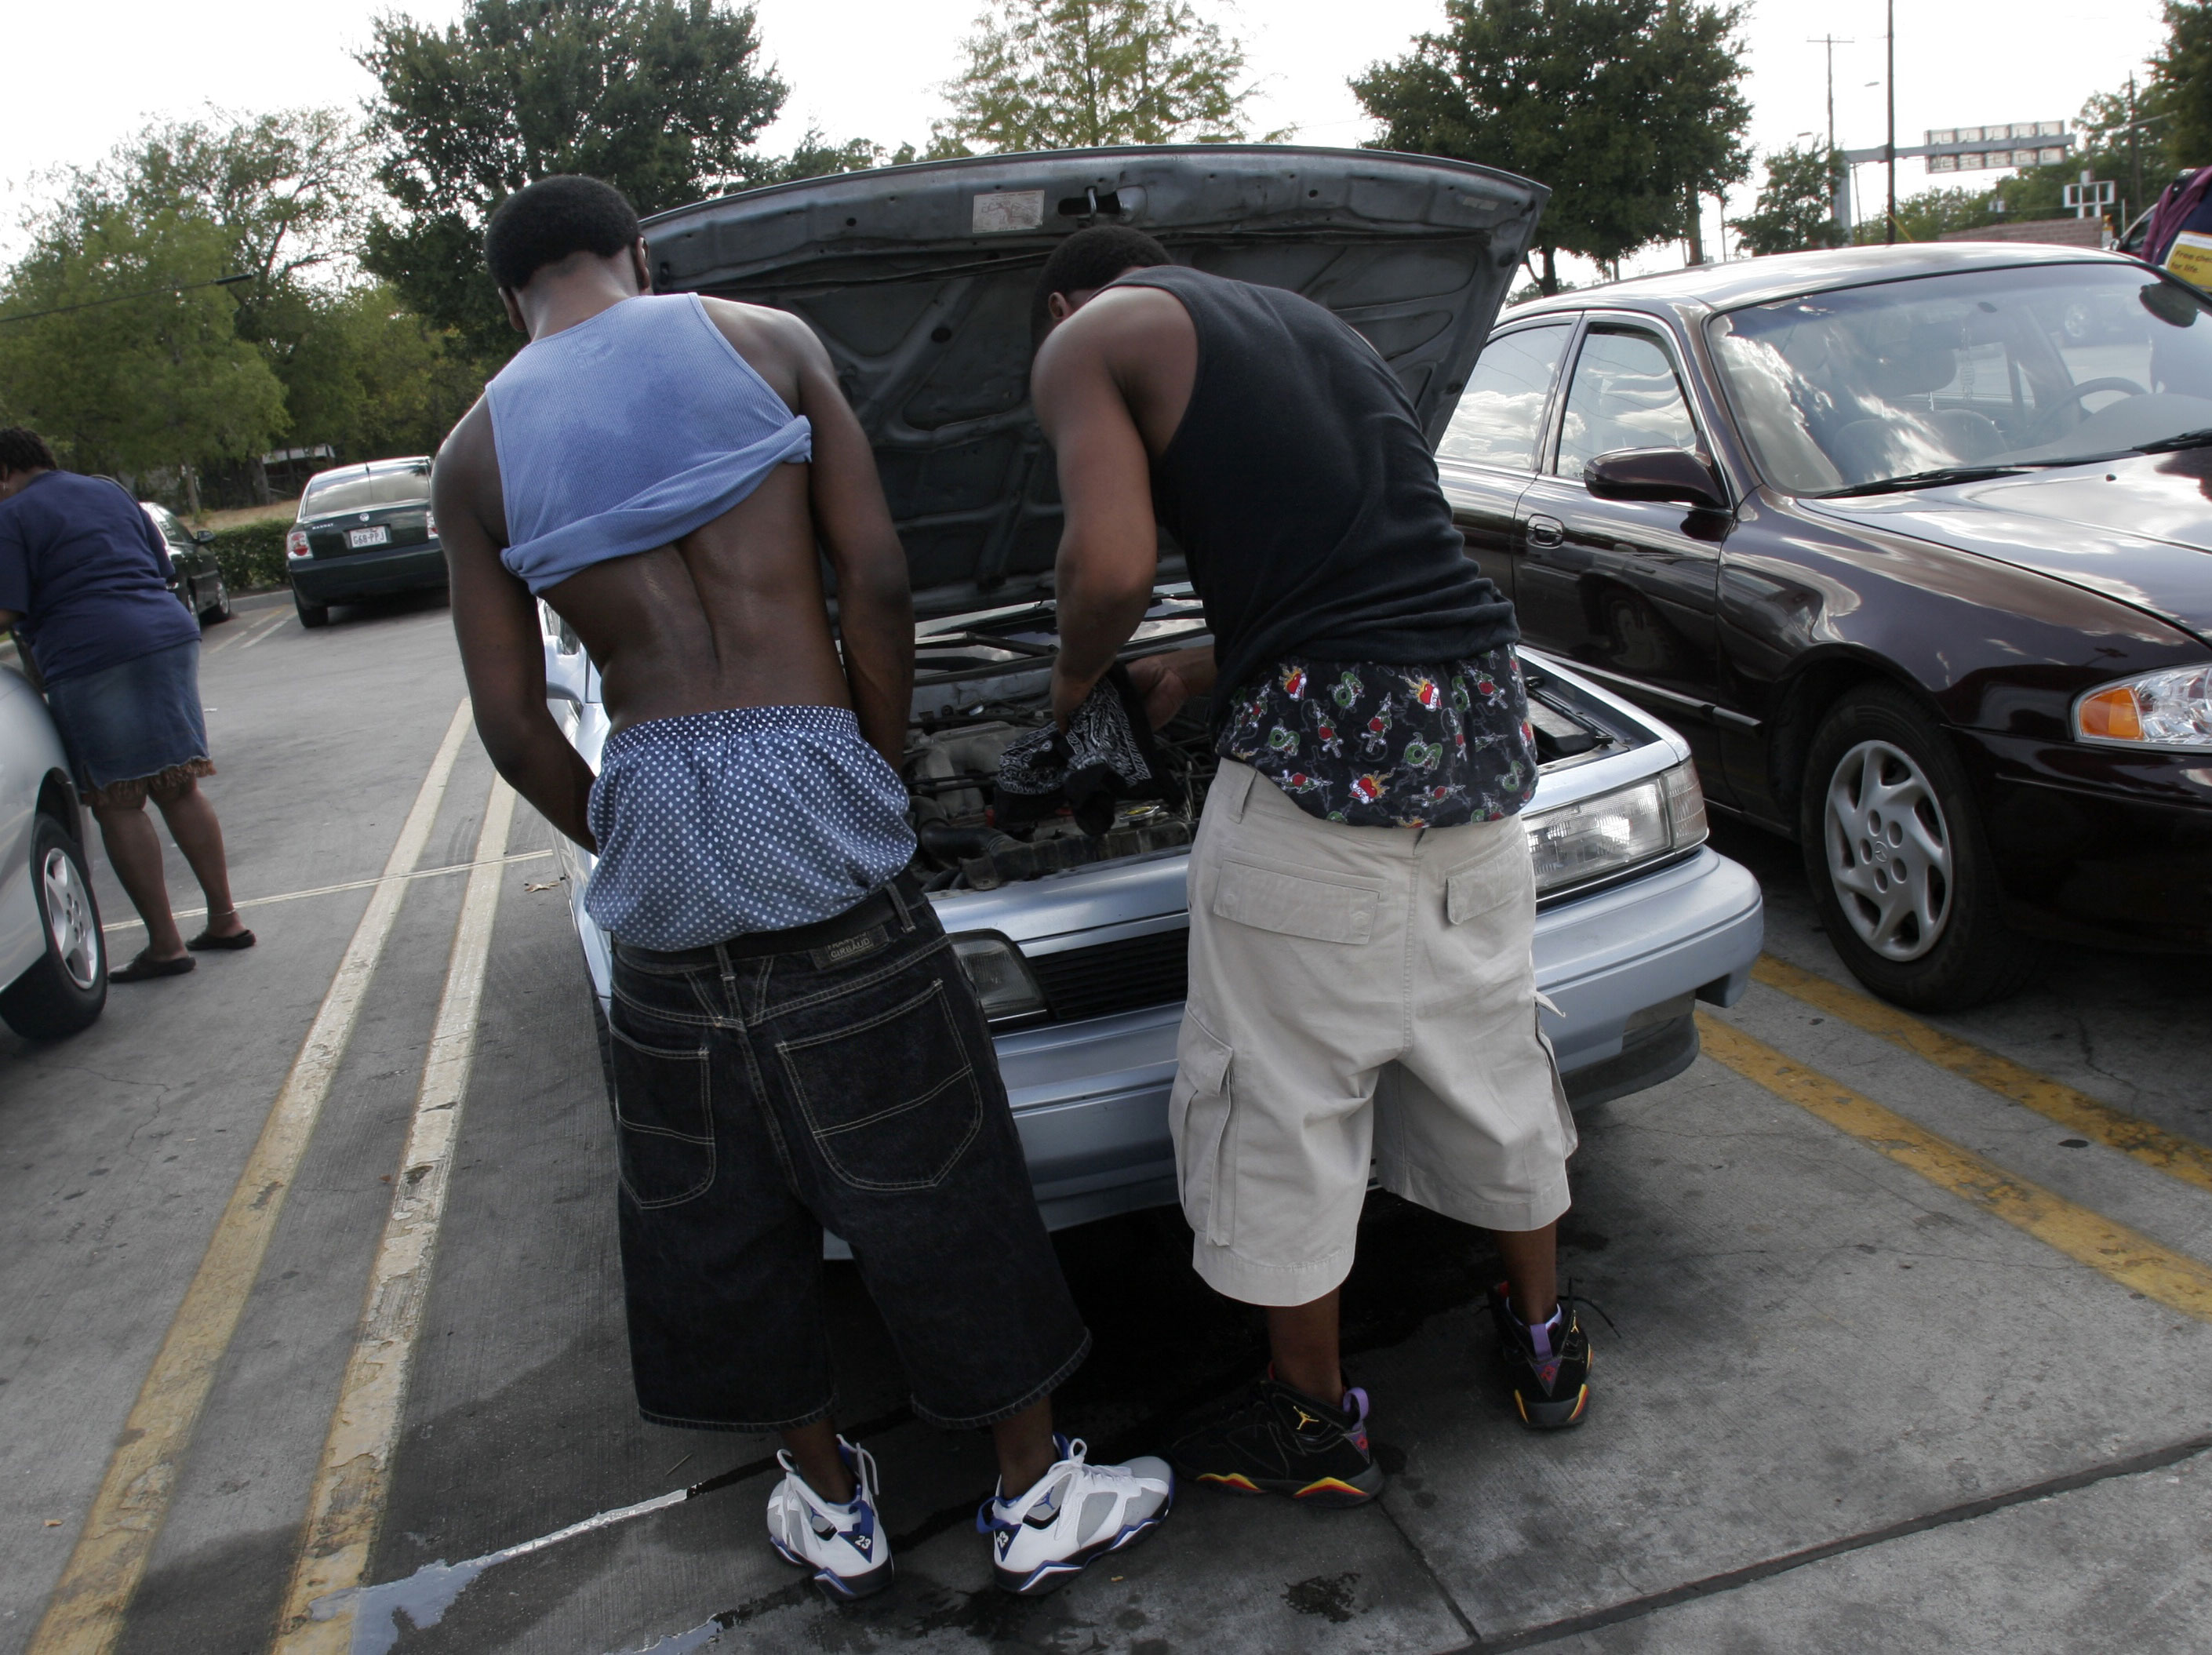 Flint Police Chief locks up youngsters for saggy pants « The “D” Spot